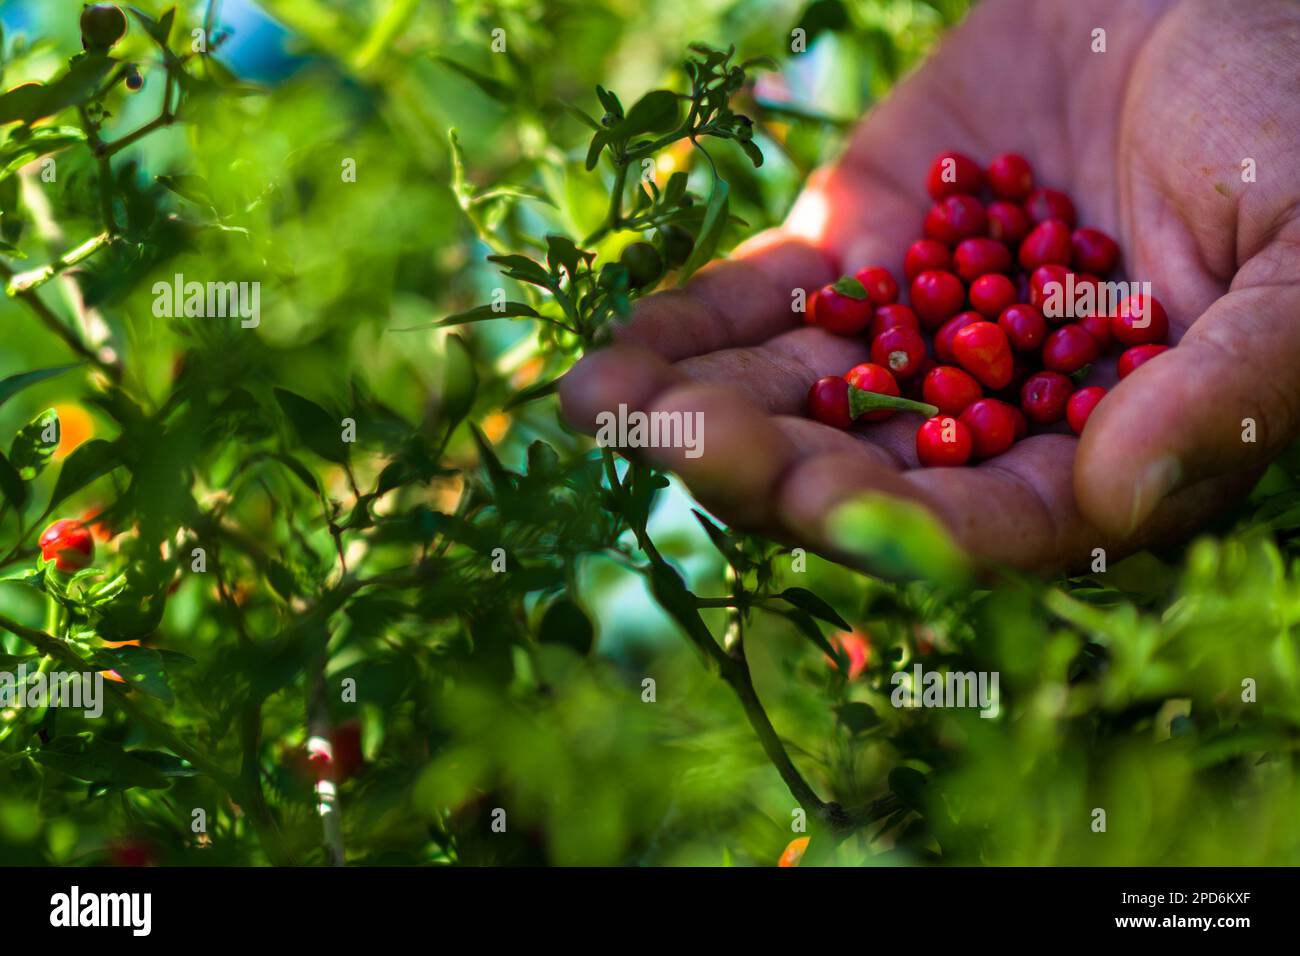 A hand of a Mexican peasant is seen holding chiltepin peppers, a wild variety of chili pepper, during a harvest on a farm near Baviácora, Mexico. Stock Photo